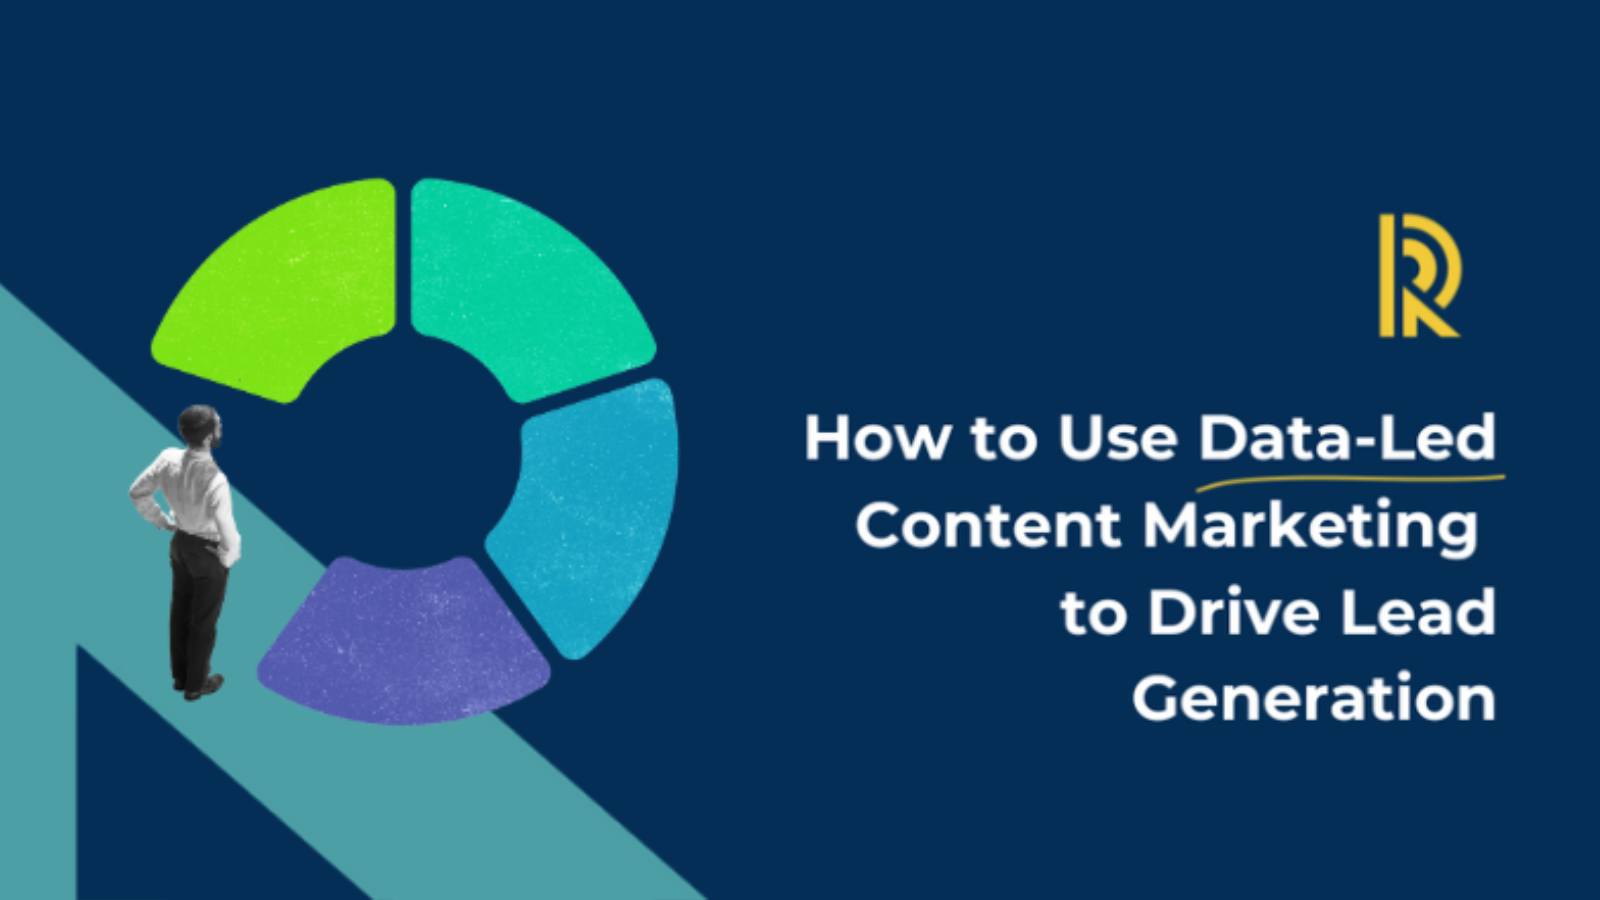 How to Use Data-Led Content Marketing to Drive Lead Generation